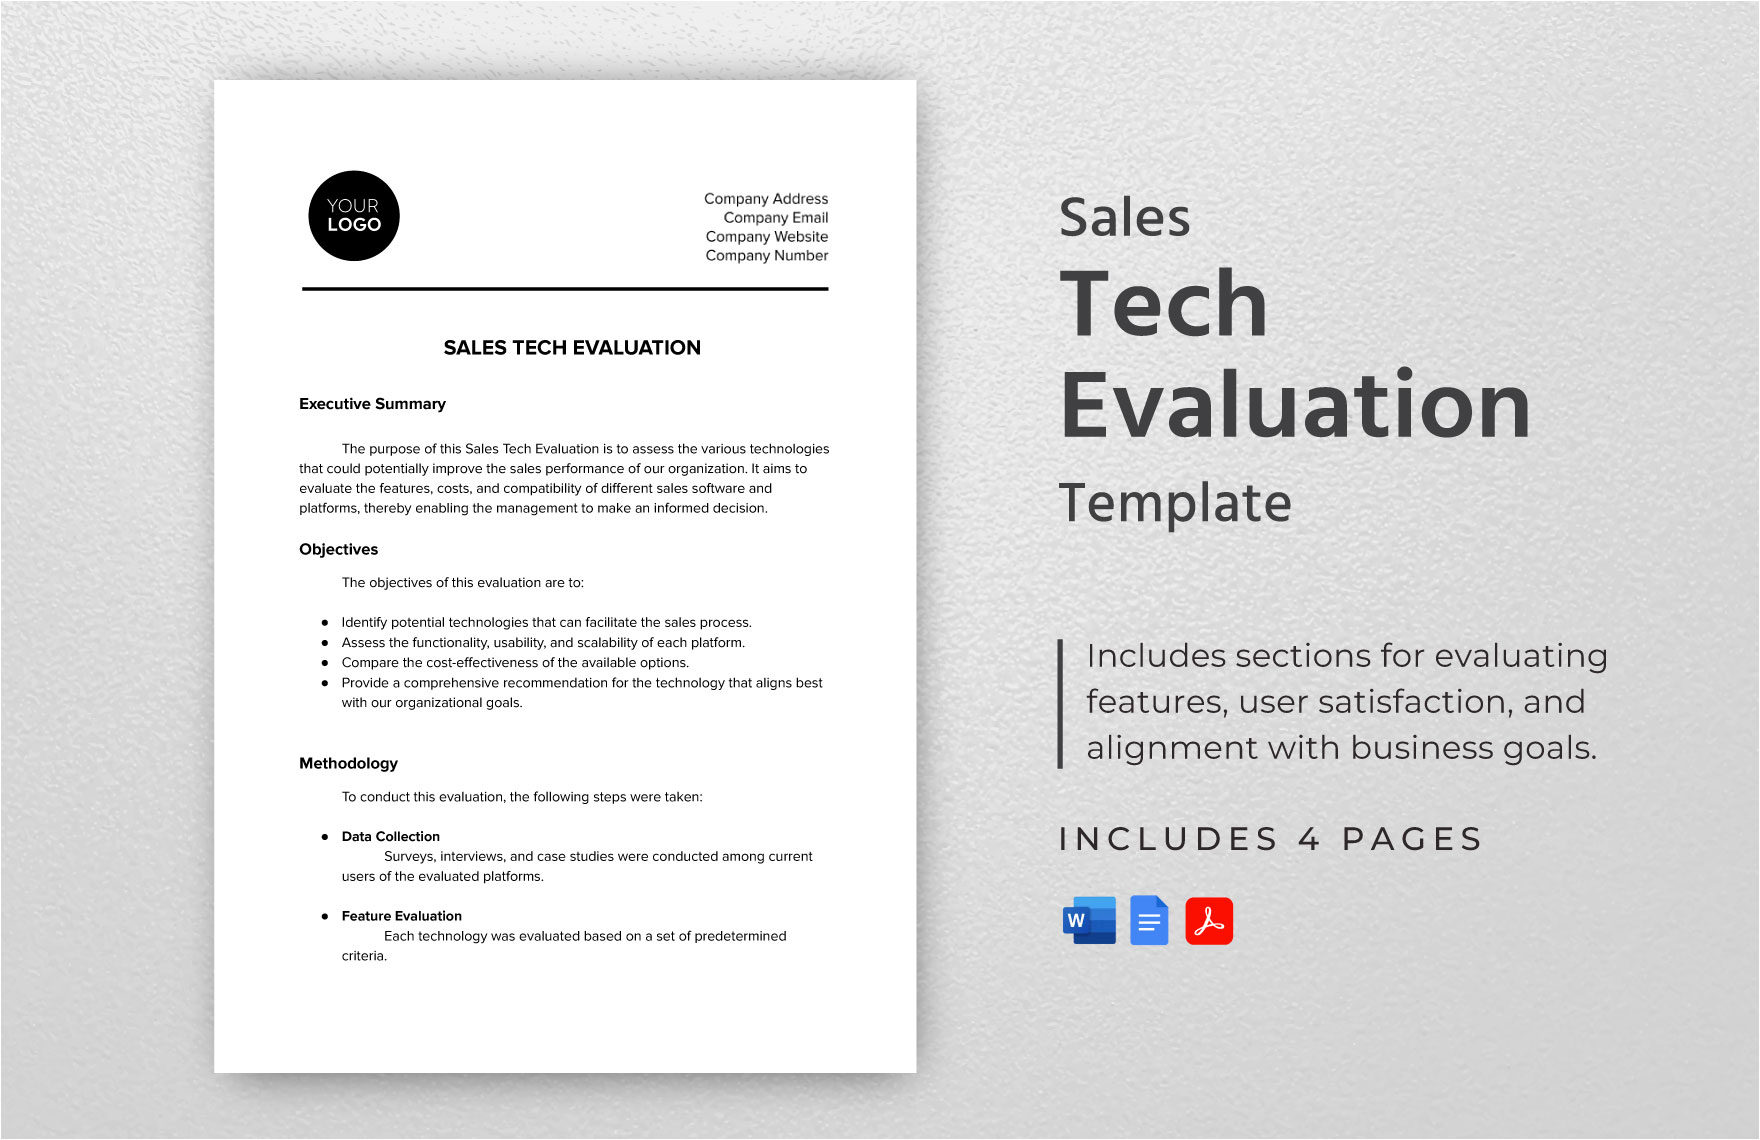 Sales Tech Evaluation Template in Word, Google Docs, PDF